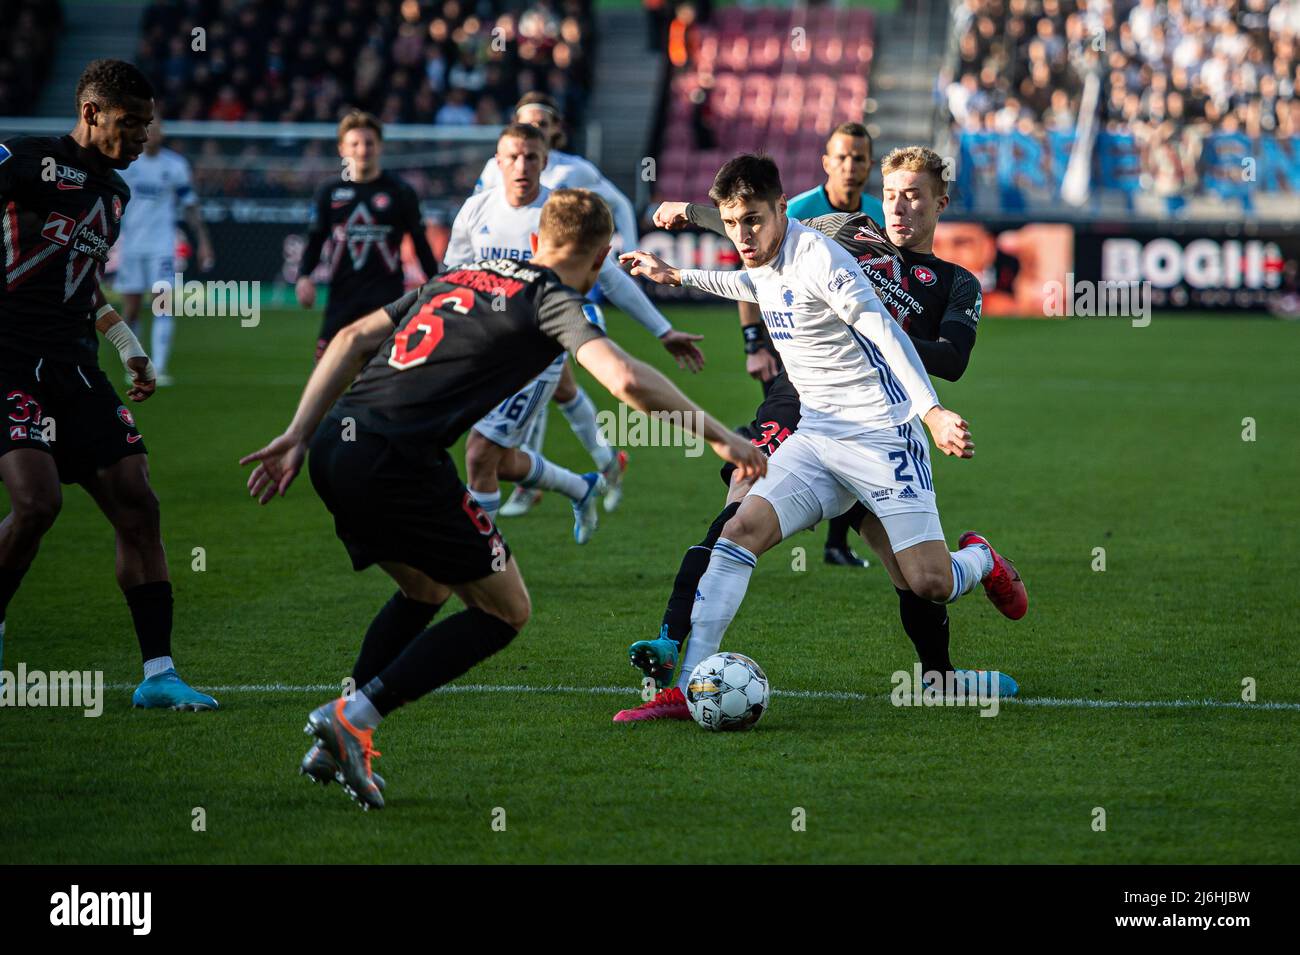 Herning, Denmark. 01st, May 2022. Kevin Diks (2) of FC Copenhagen and Charles (35) of FC Midtjylland seen during the 3F Superliga match between FC Midtjylland and FC Copenhagen at MCH Arena in Herning. (Photo credit: Gonzales Photo - Morten Kjaer). Stock Photo